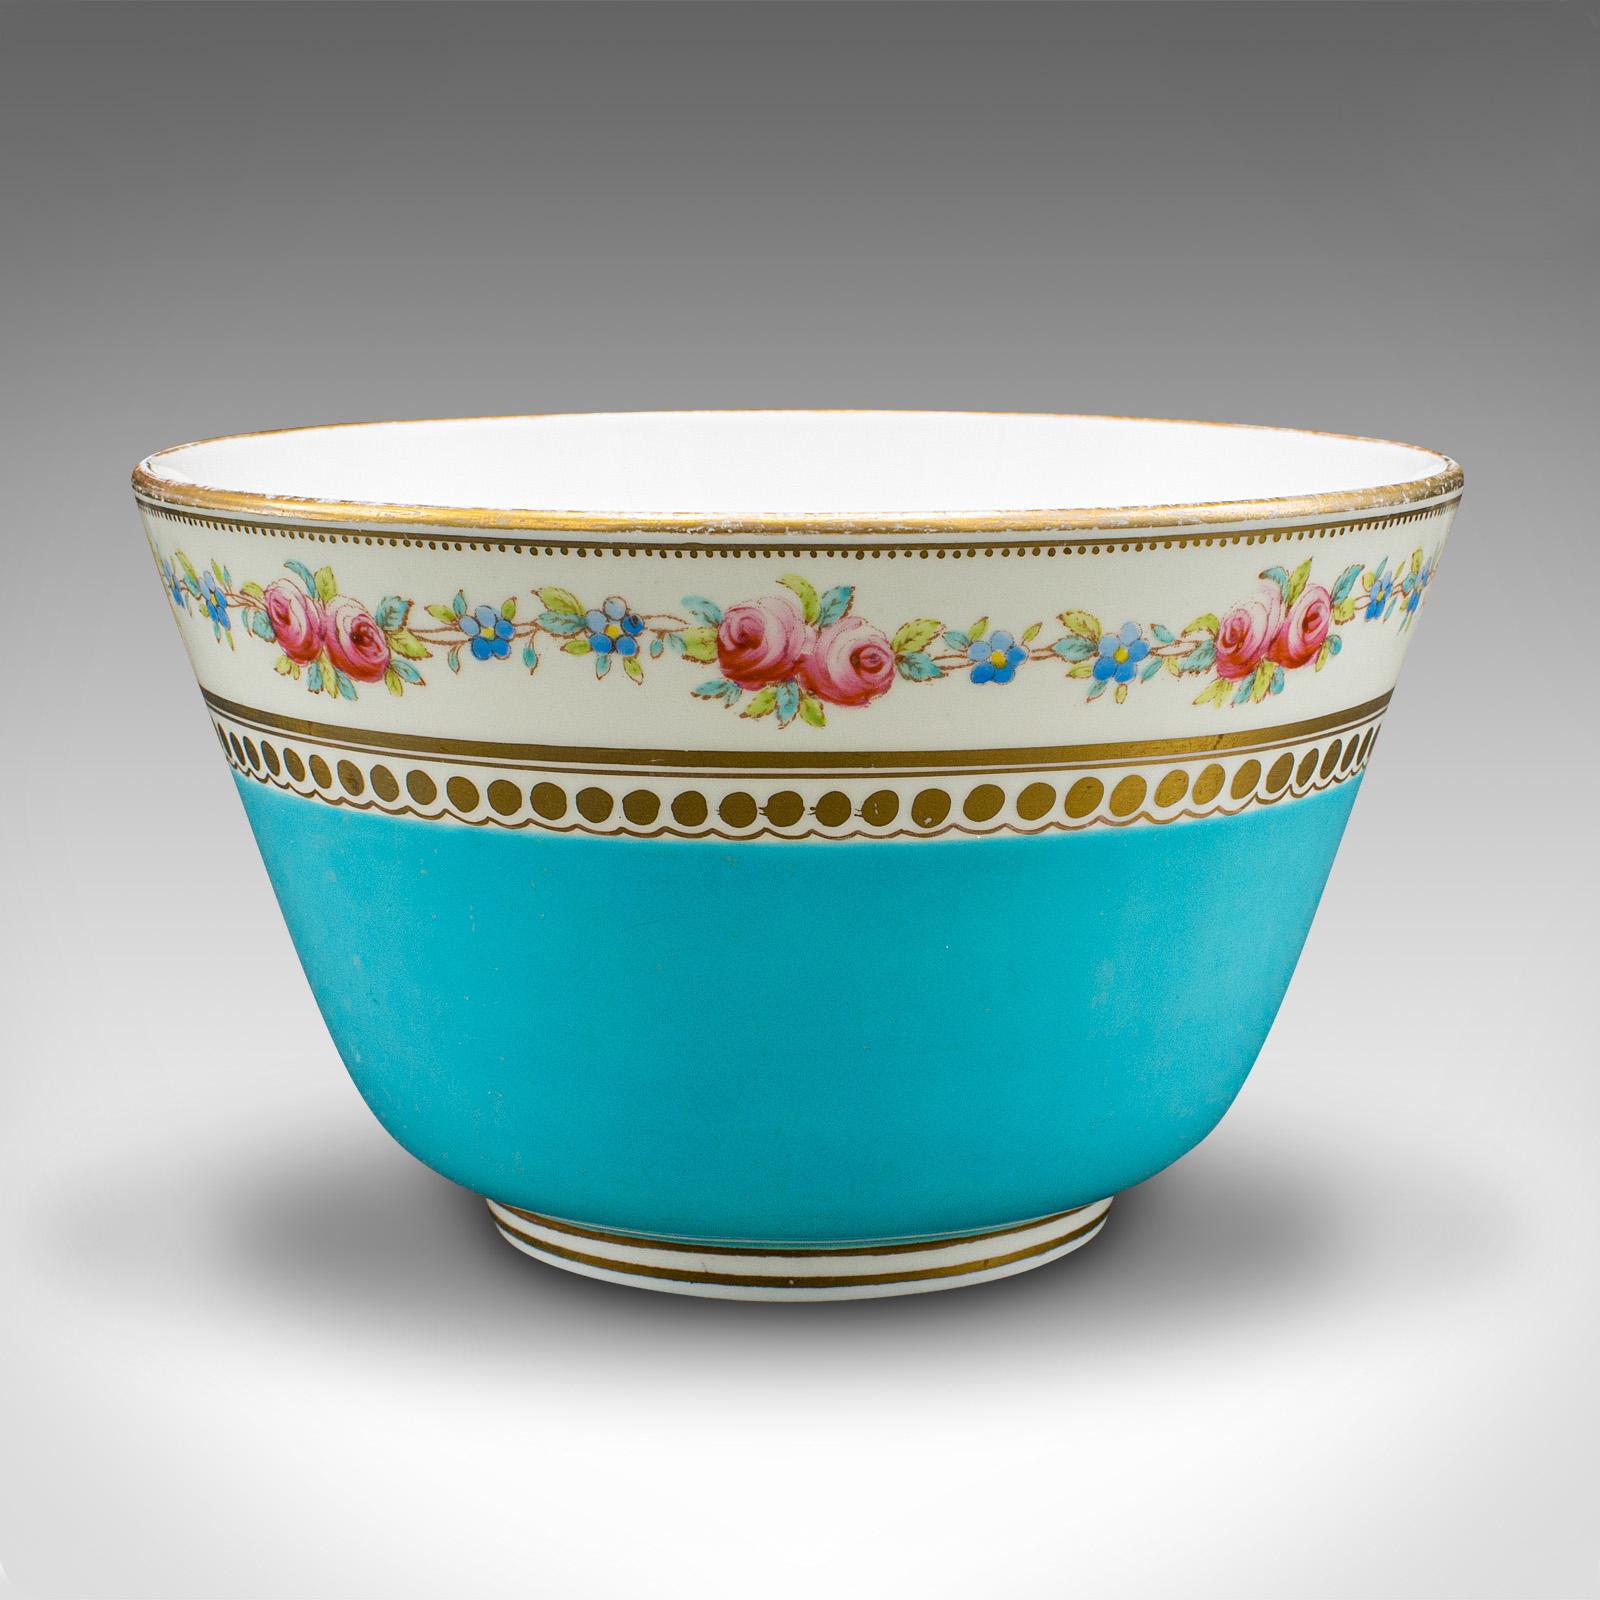 This is an antique sugar bowl. An English, ceramic afternoon tea dish, dating to the early 20th century, circa 1920.

Beautifully decorative dish with wonderful colour
Displays a desirable aged patina and in good order
White ceramic hosts a fine